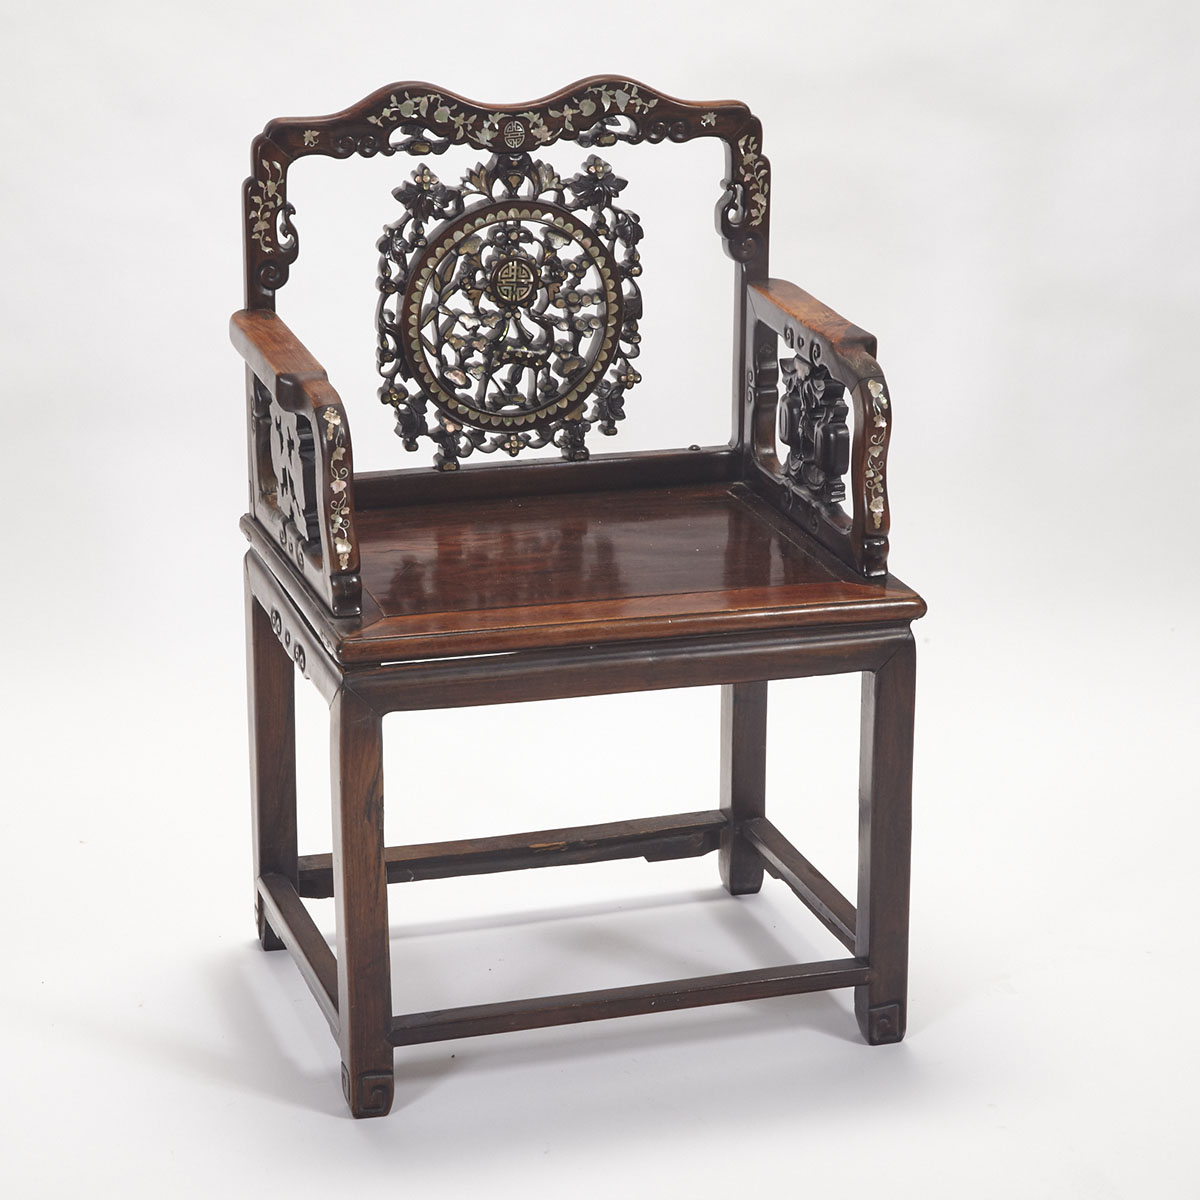 Carved Desk and Mother of Pearl Inlaid Chair